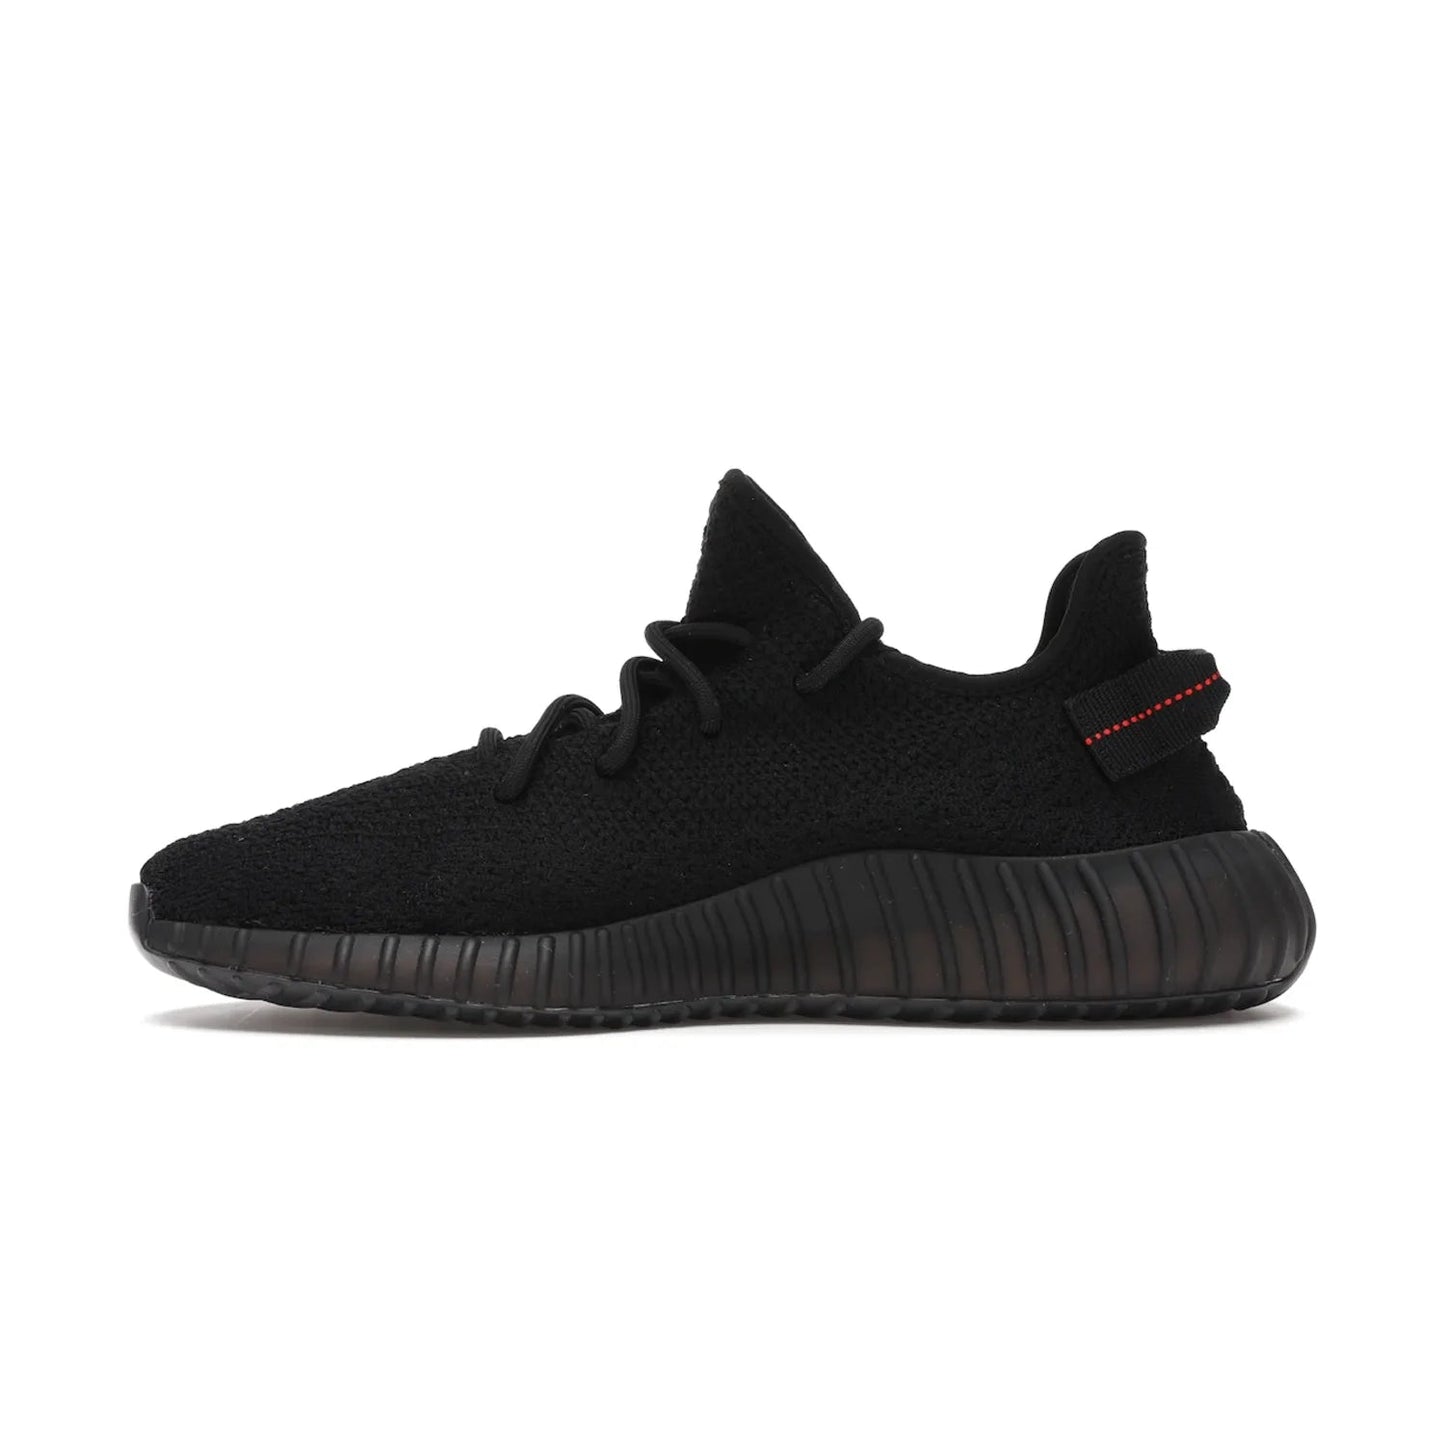 adidas Yeezy Boost 350 V2 Black Red (2017/2020) - Image 19 - Only at www.BallersClubKickz.com - Adidas Yeezy Boost 350 V2 Black Red: a classic colorway featuring black Primeknit upper, BOOST cushioning system, and iconic "SPLY-350" text. Released in 2017 for a retail price of $220.